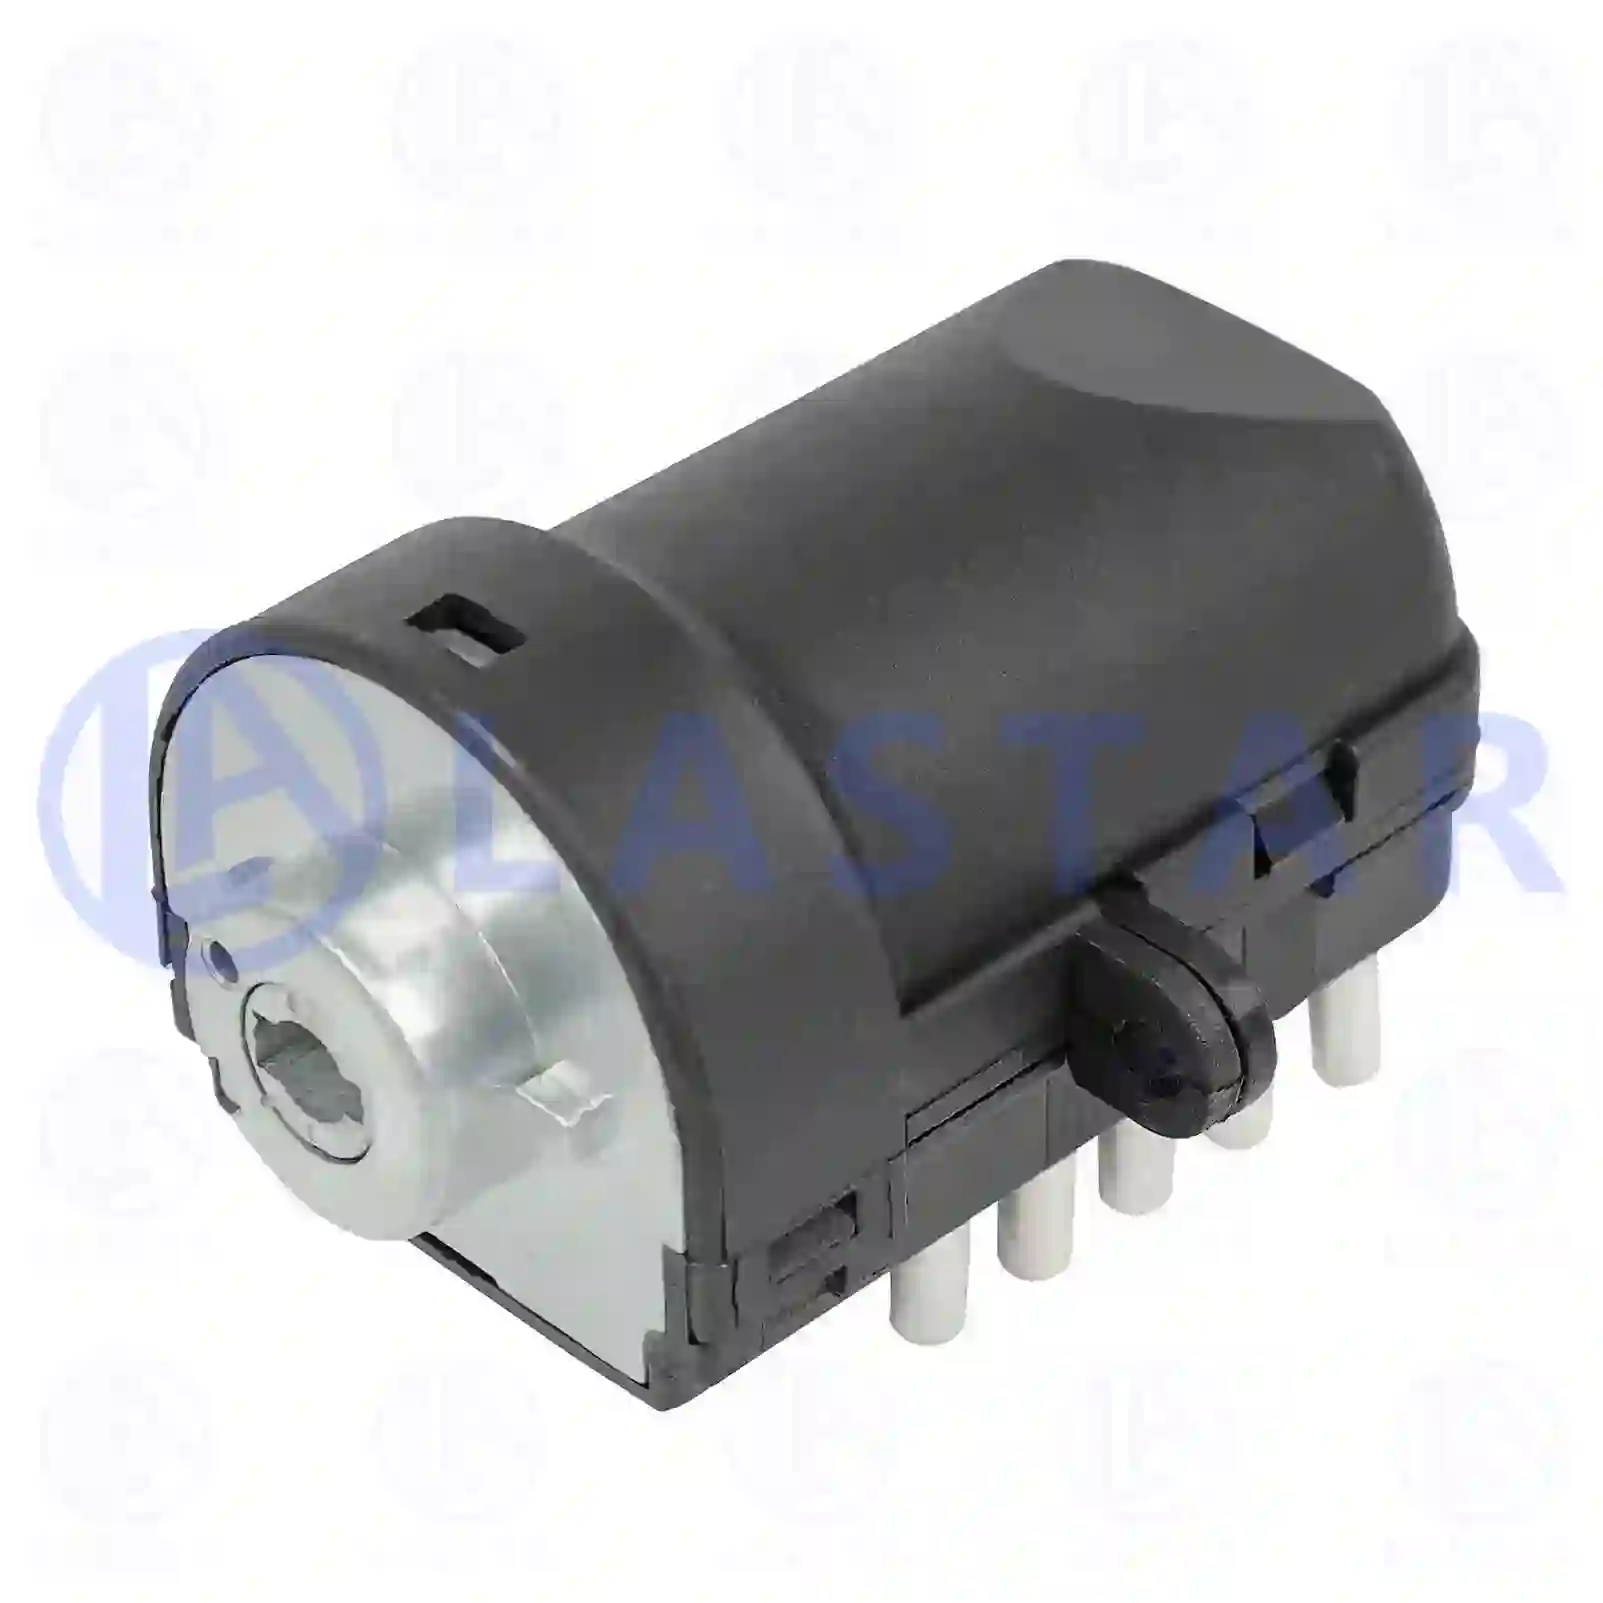 Ignition switch, 77704970, 3197718, ZG20032-0008 ||  77704970 Lastar Spare Part | Truck Spare Parts, Auotomotive Spare Parts Ignition switch, 77704970, 3197718, ZG20032-0008 ||  77704970 Lastar Spare Part | Truck Spare Parts, Auotomotive Spare Parts